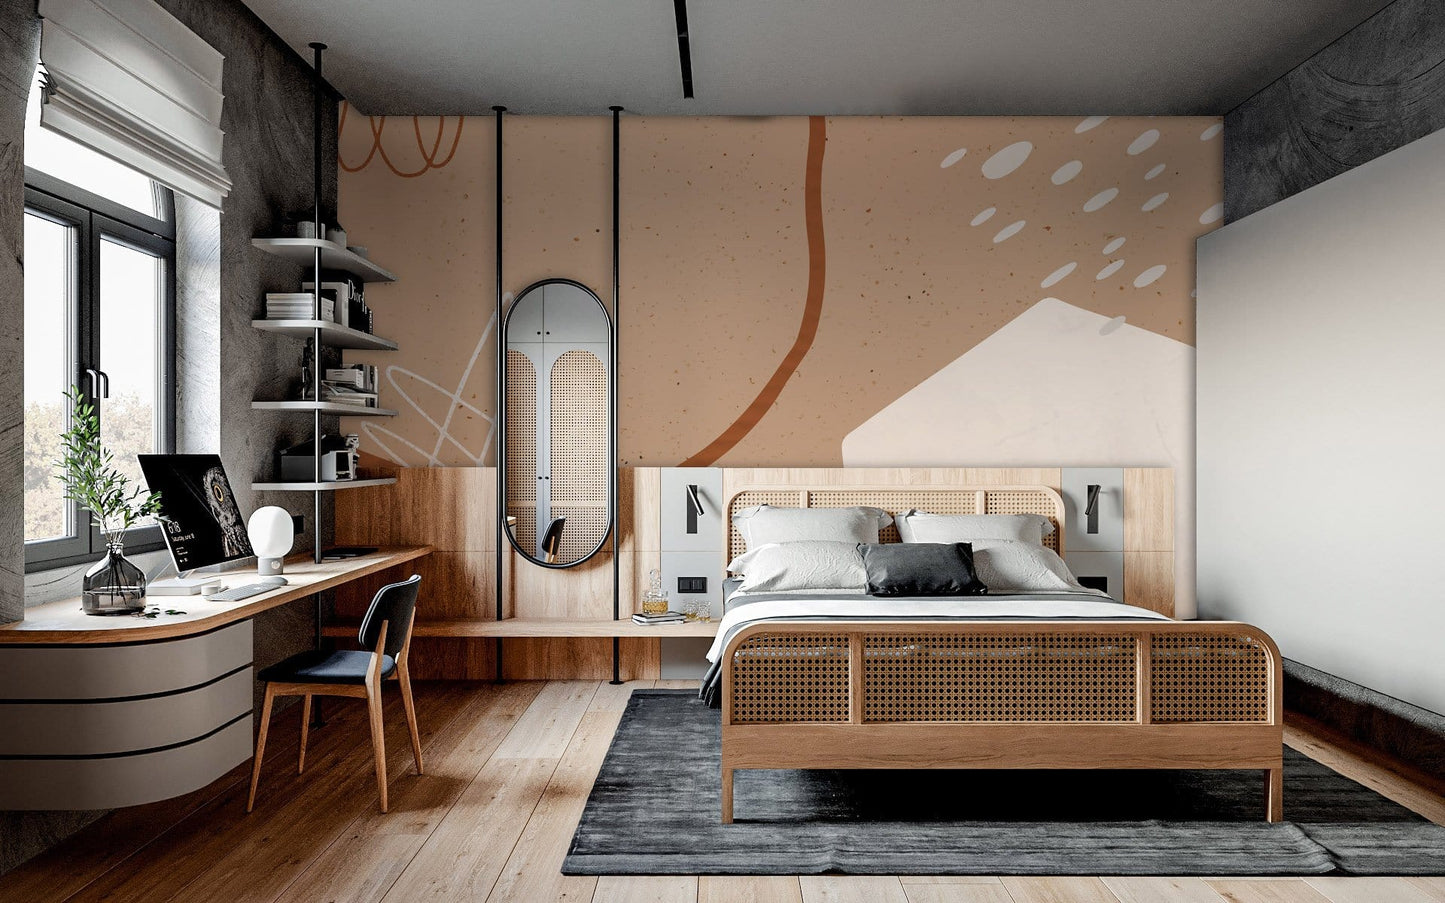 Wallpaper mural with a brown abstract pattern for use in decorating the bedroom